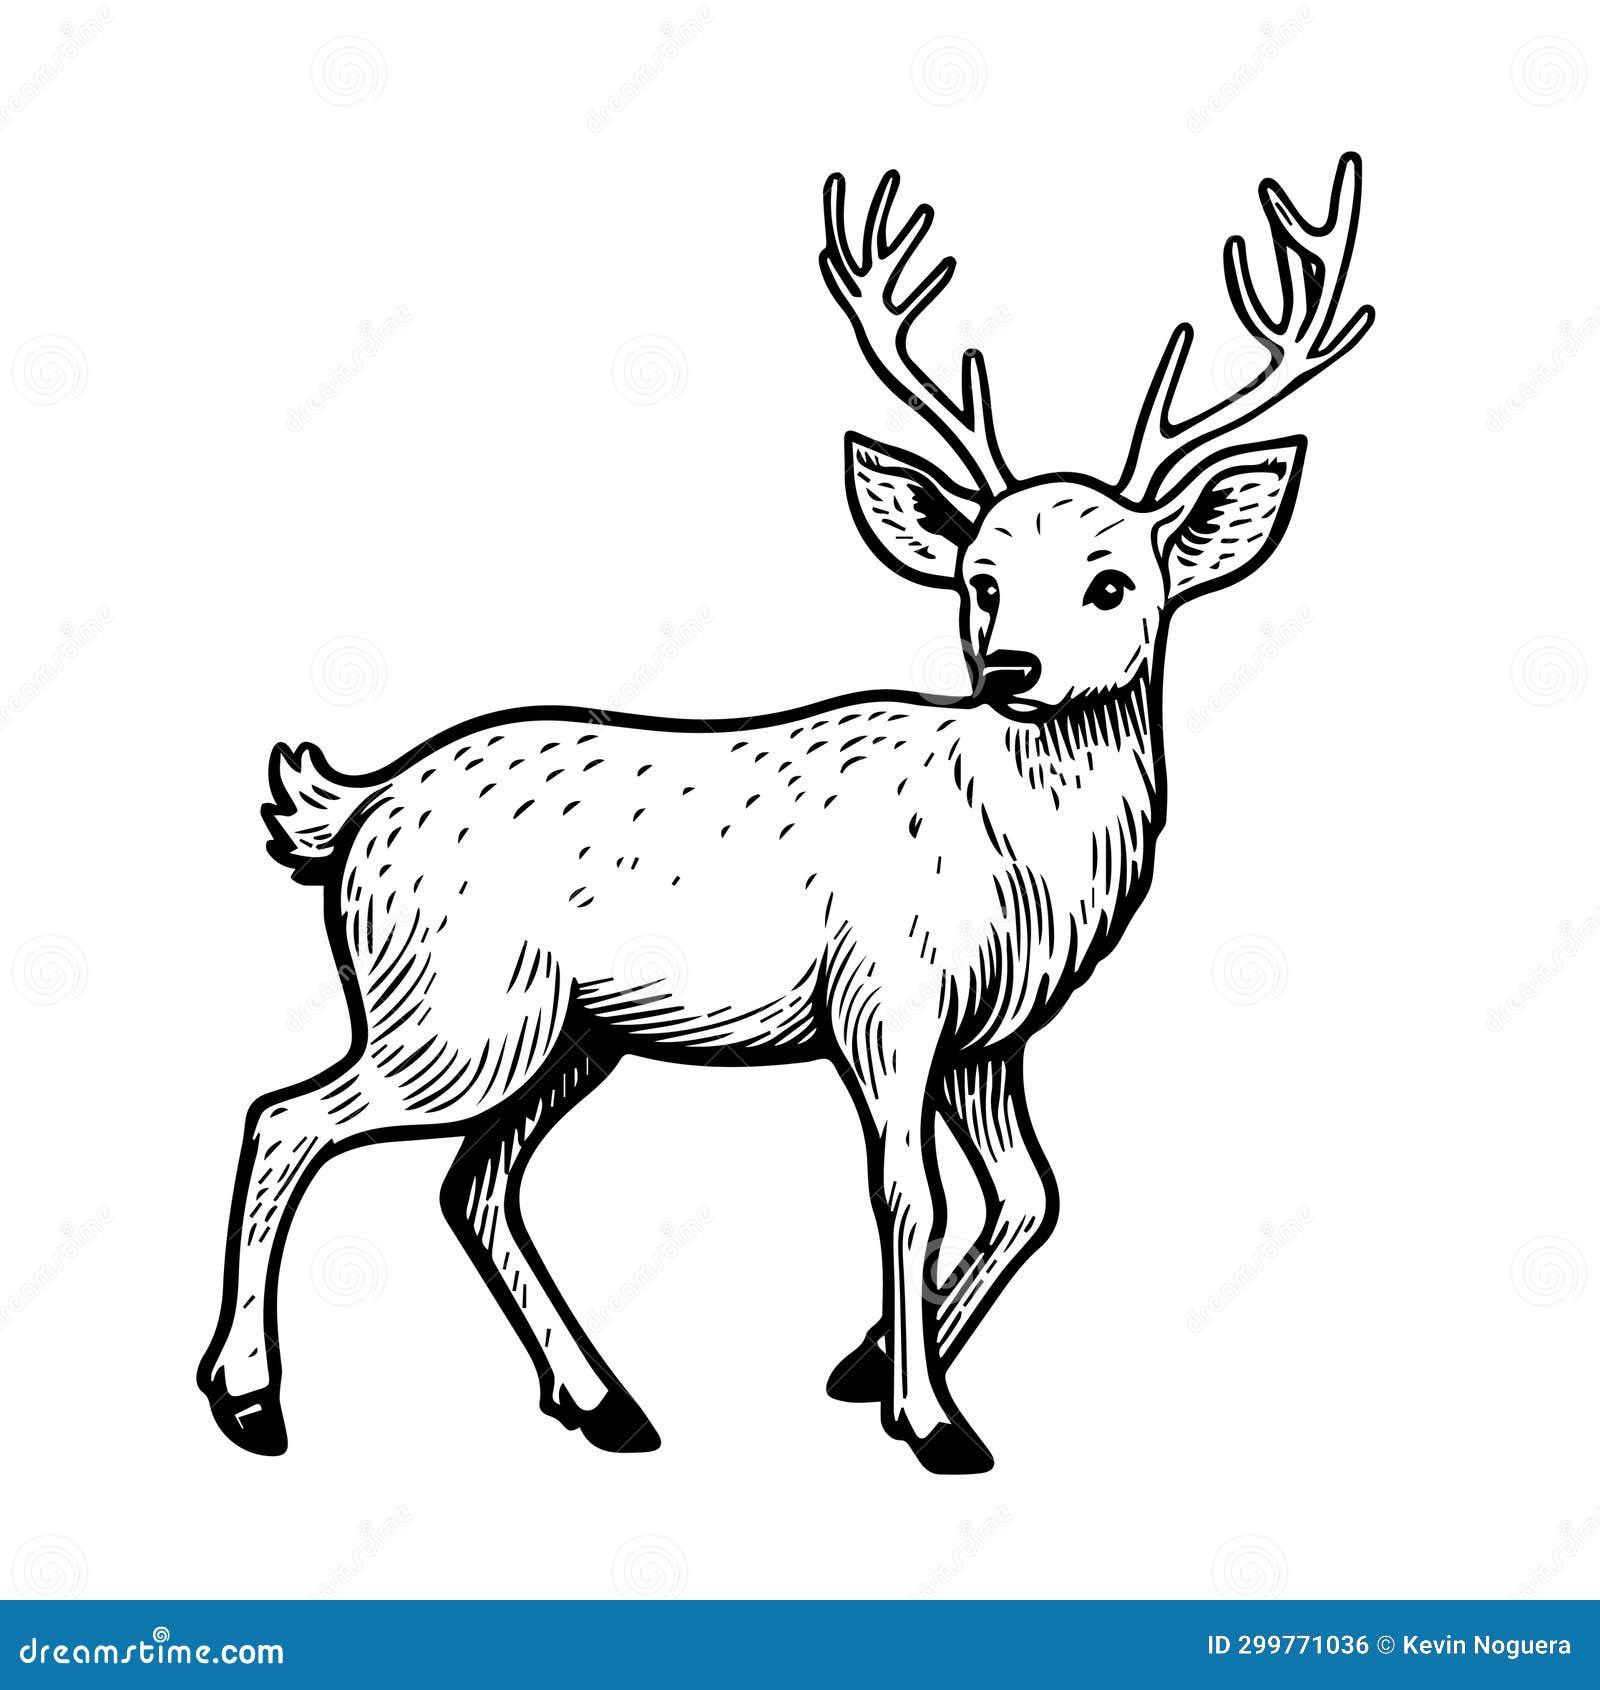 Caribou coloring page stock illustrations â caribou coloring page stock illustrations vectors clipart